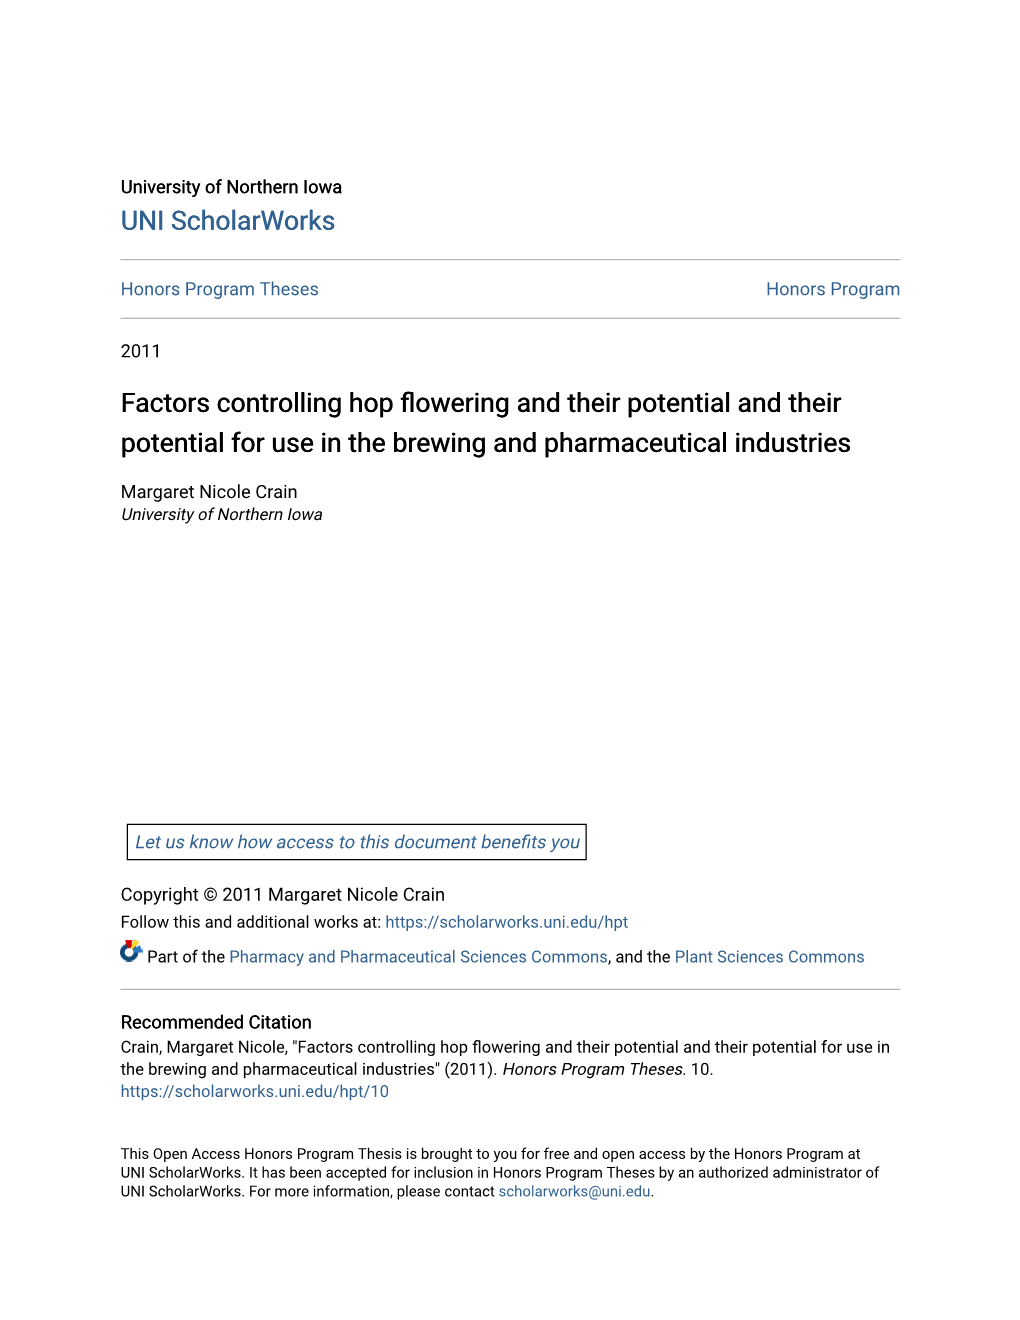 Factors Controlling Hop Flowering and Their Potential and Their Potential for Use in the Brewing and Pharmaceutical Industries